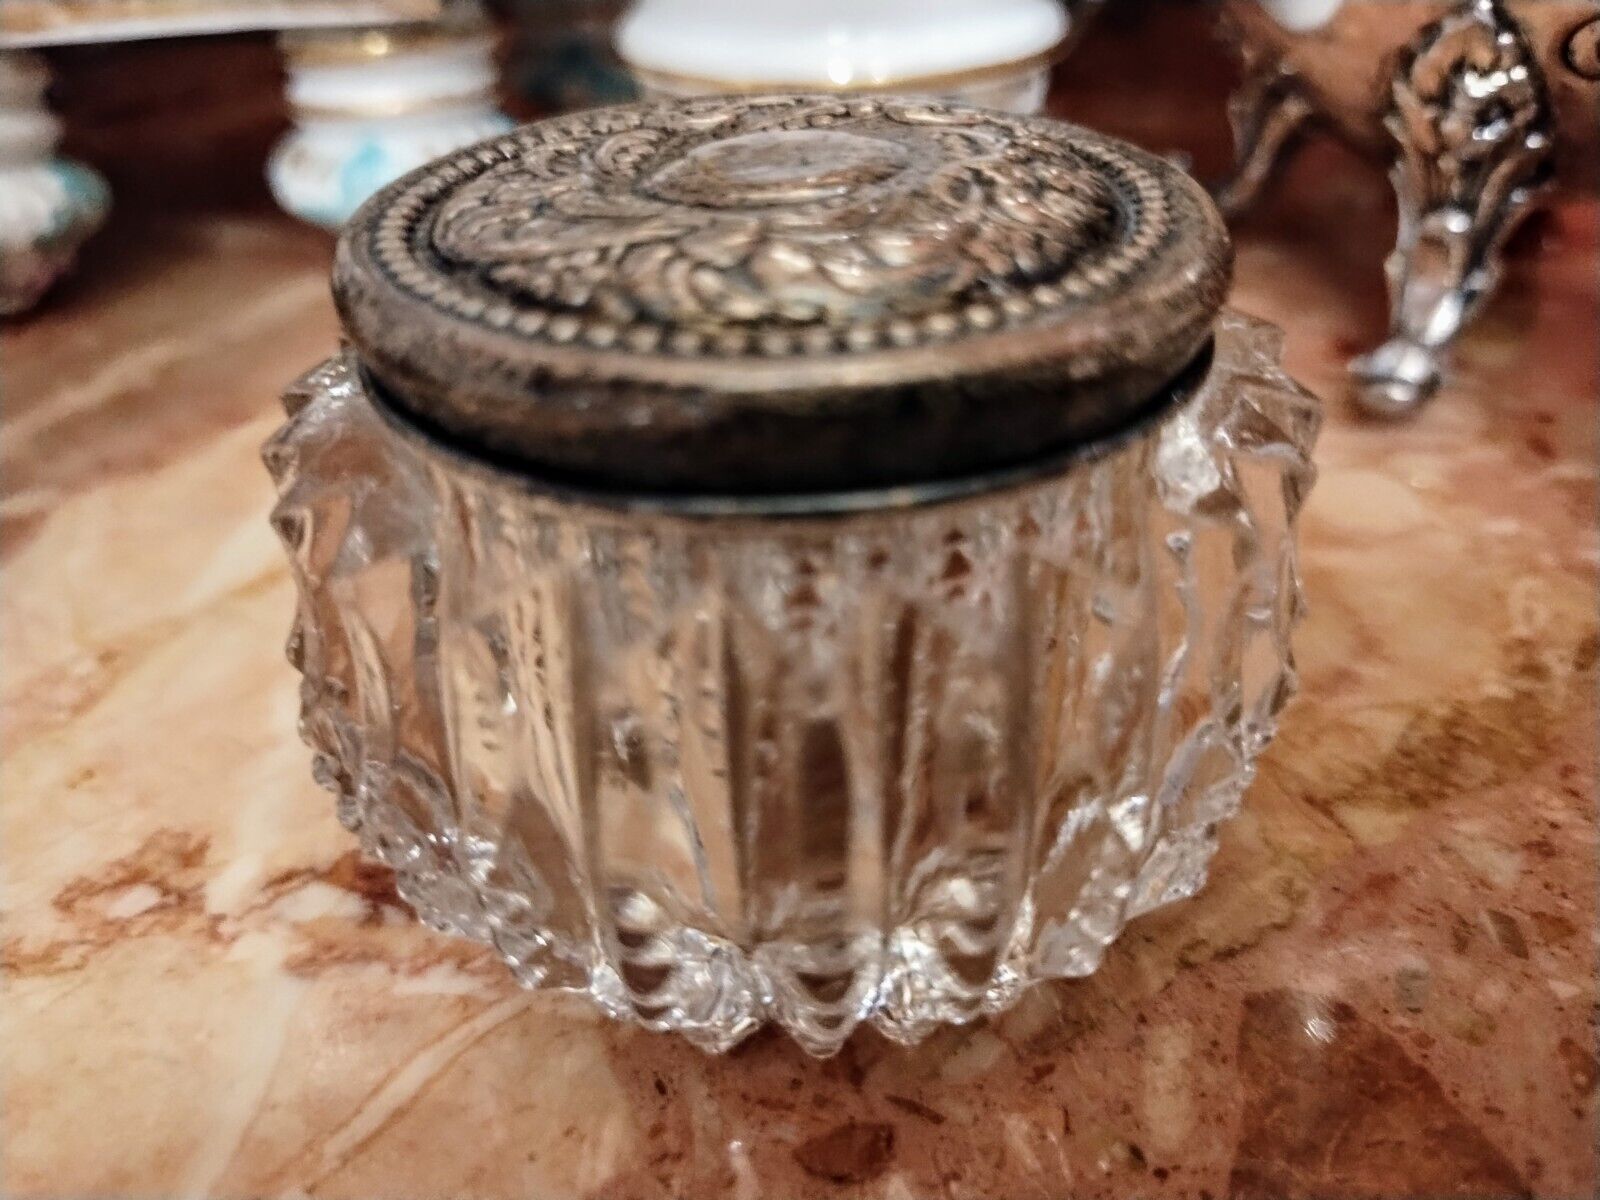 Antique Pressed Glass Dresser Vanity Jar w/ Sterling Silver Repousse Chased Lid